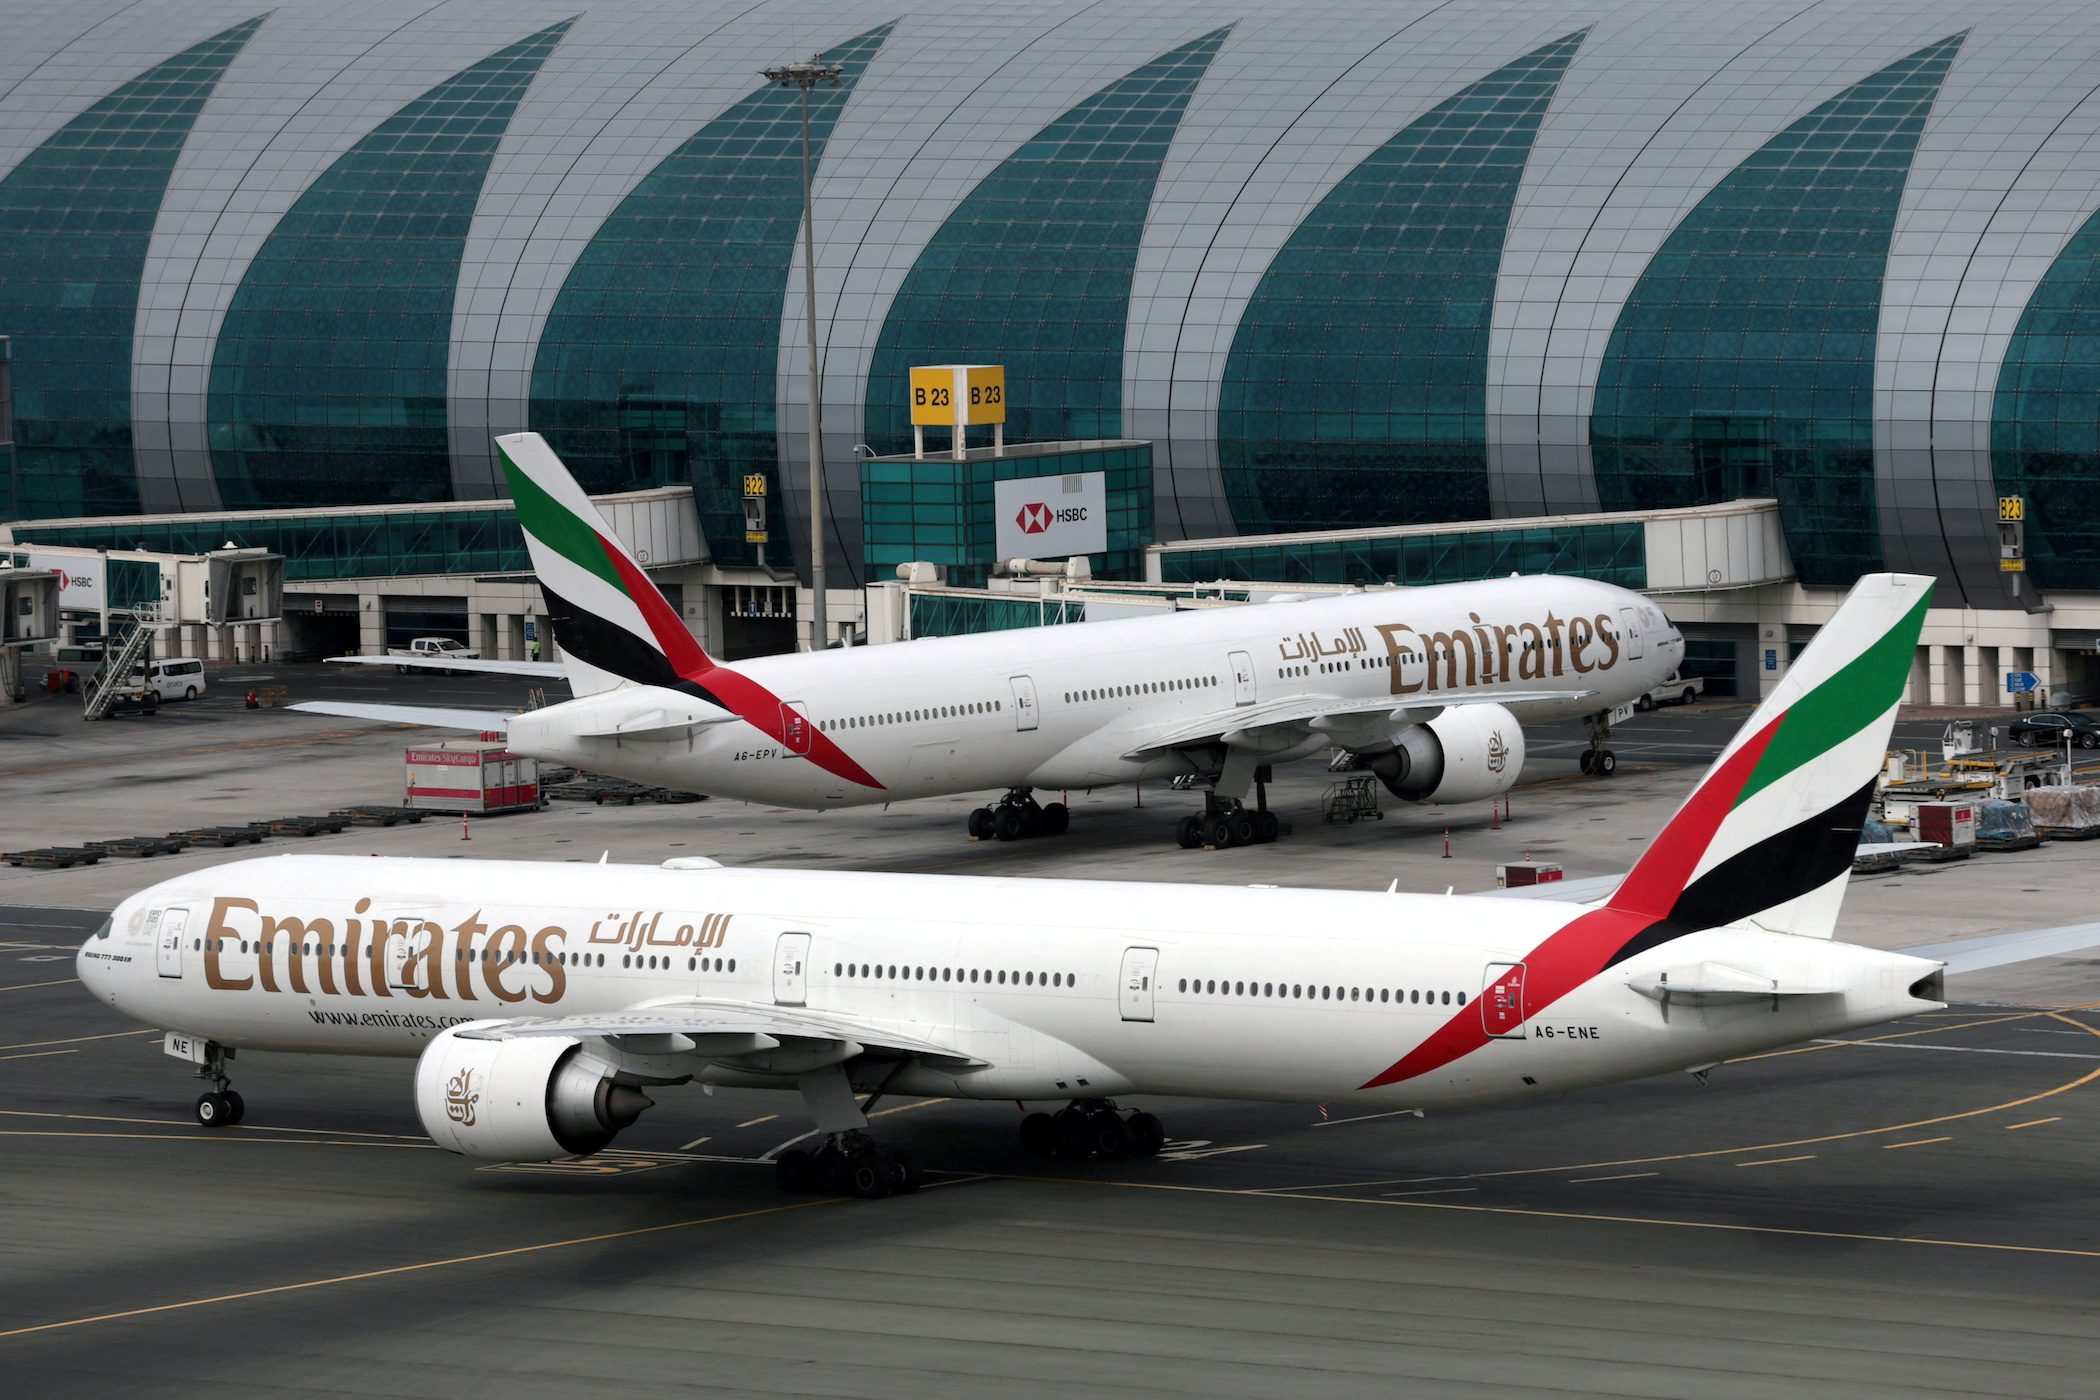 Emirates will continue flying to Russia until told not to by owners – president